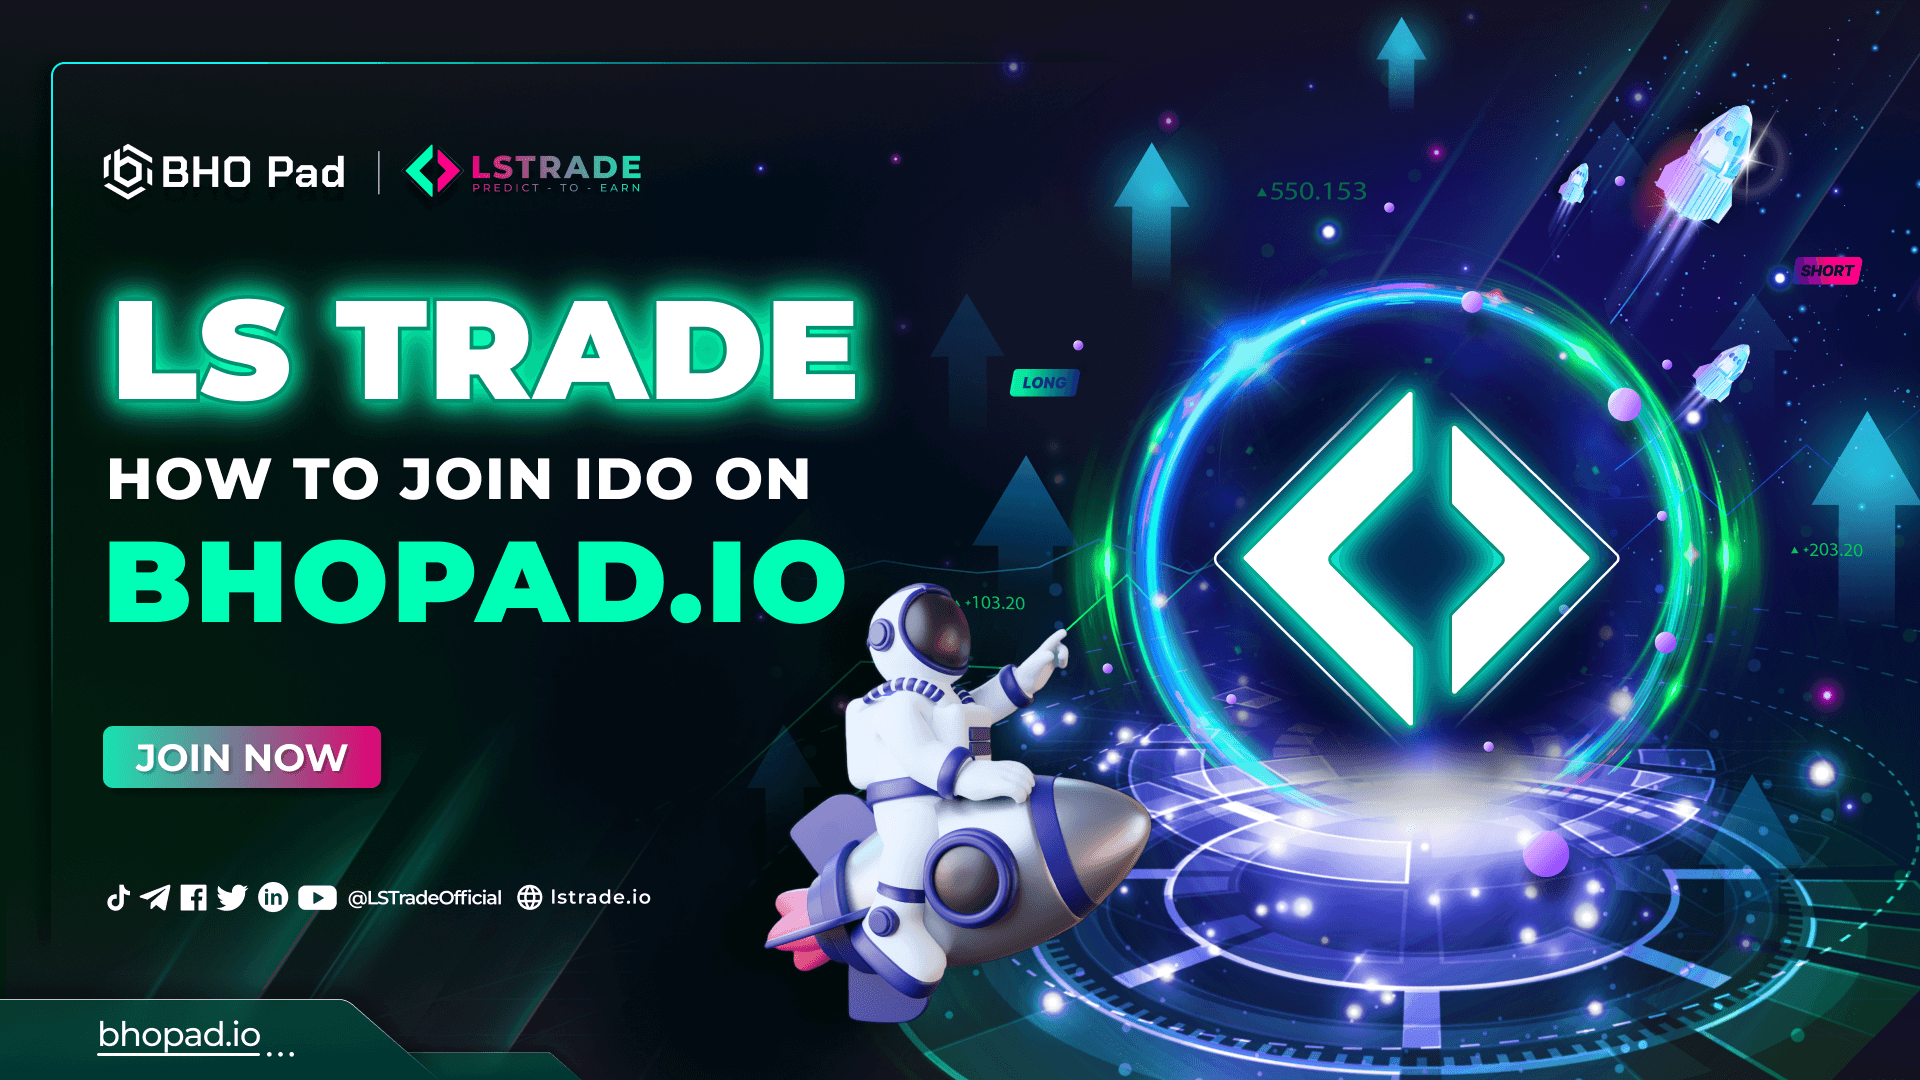 INSTRUCTIONS TO REGISTER FOR PROJECT LS TRADE’S IDO PROMOTION ON BHOPAD.IO